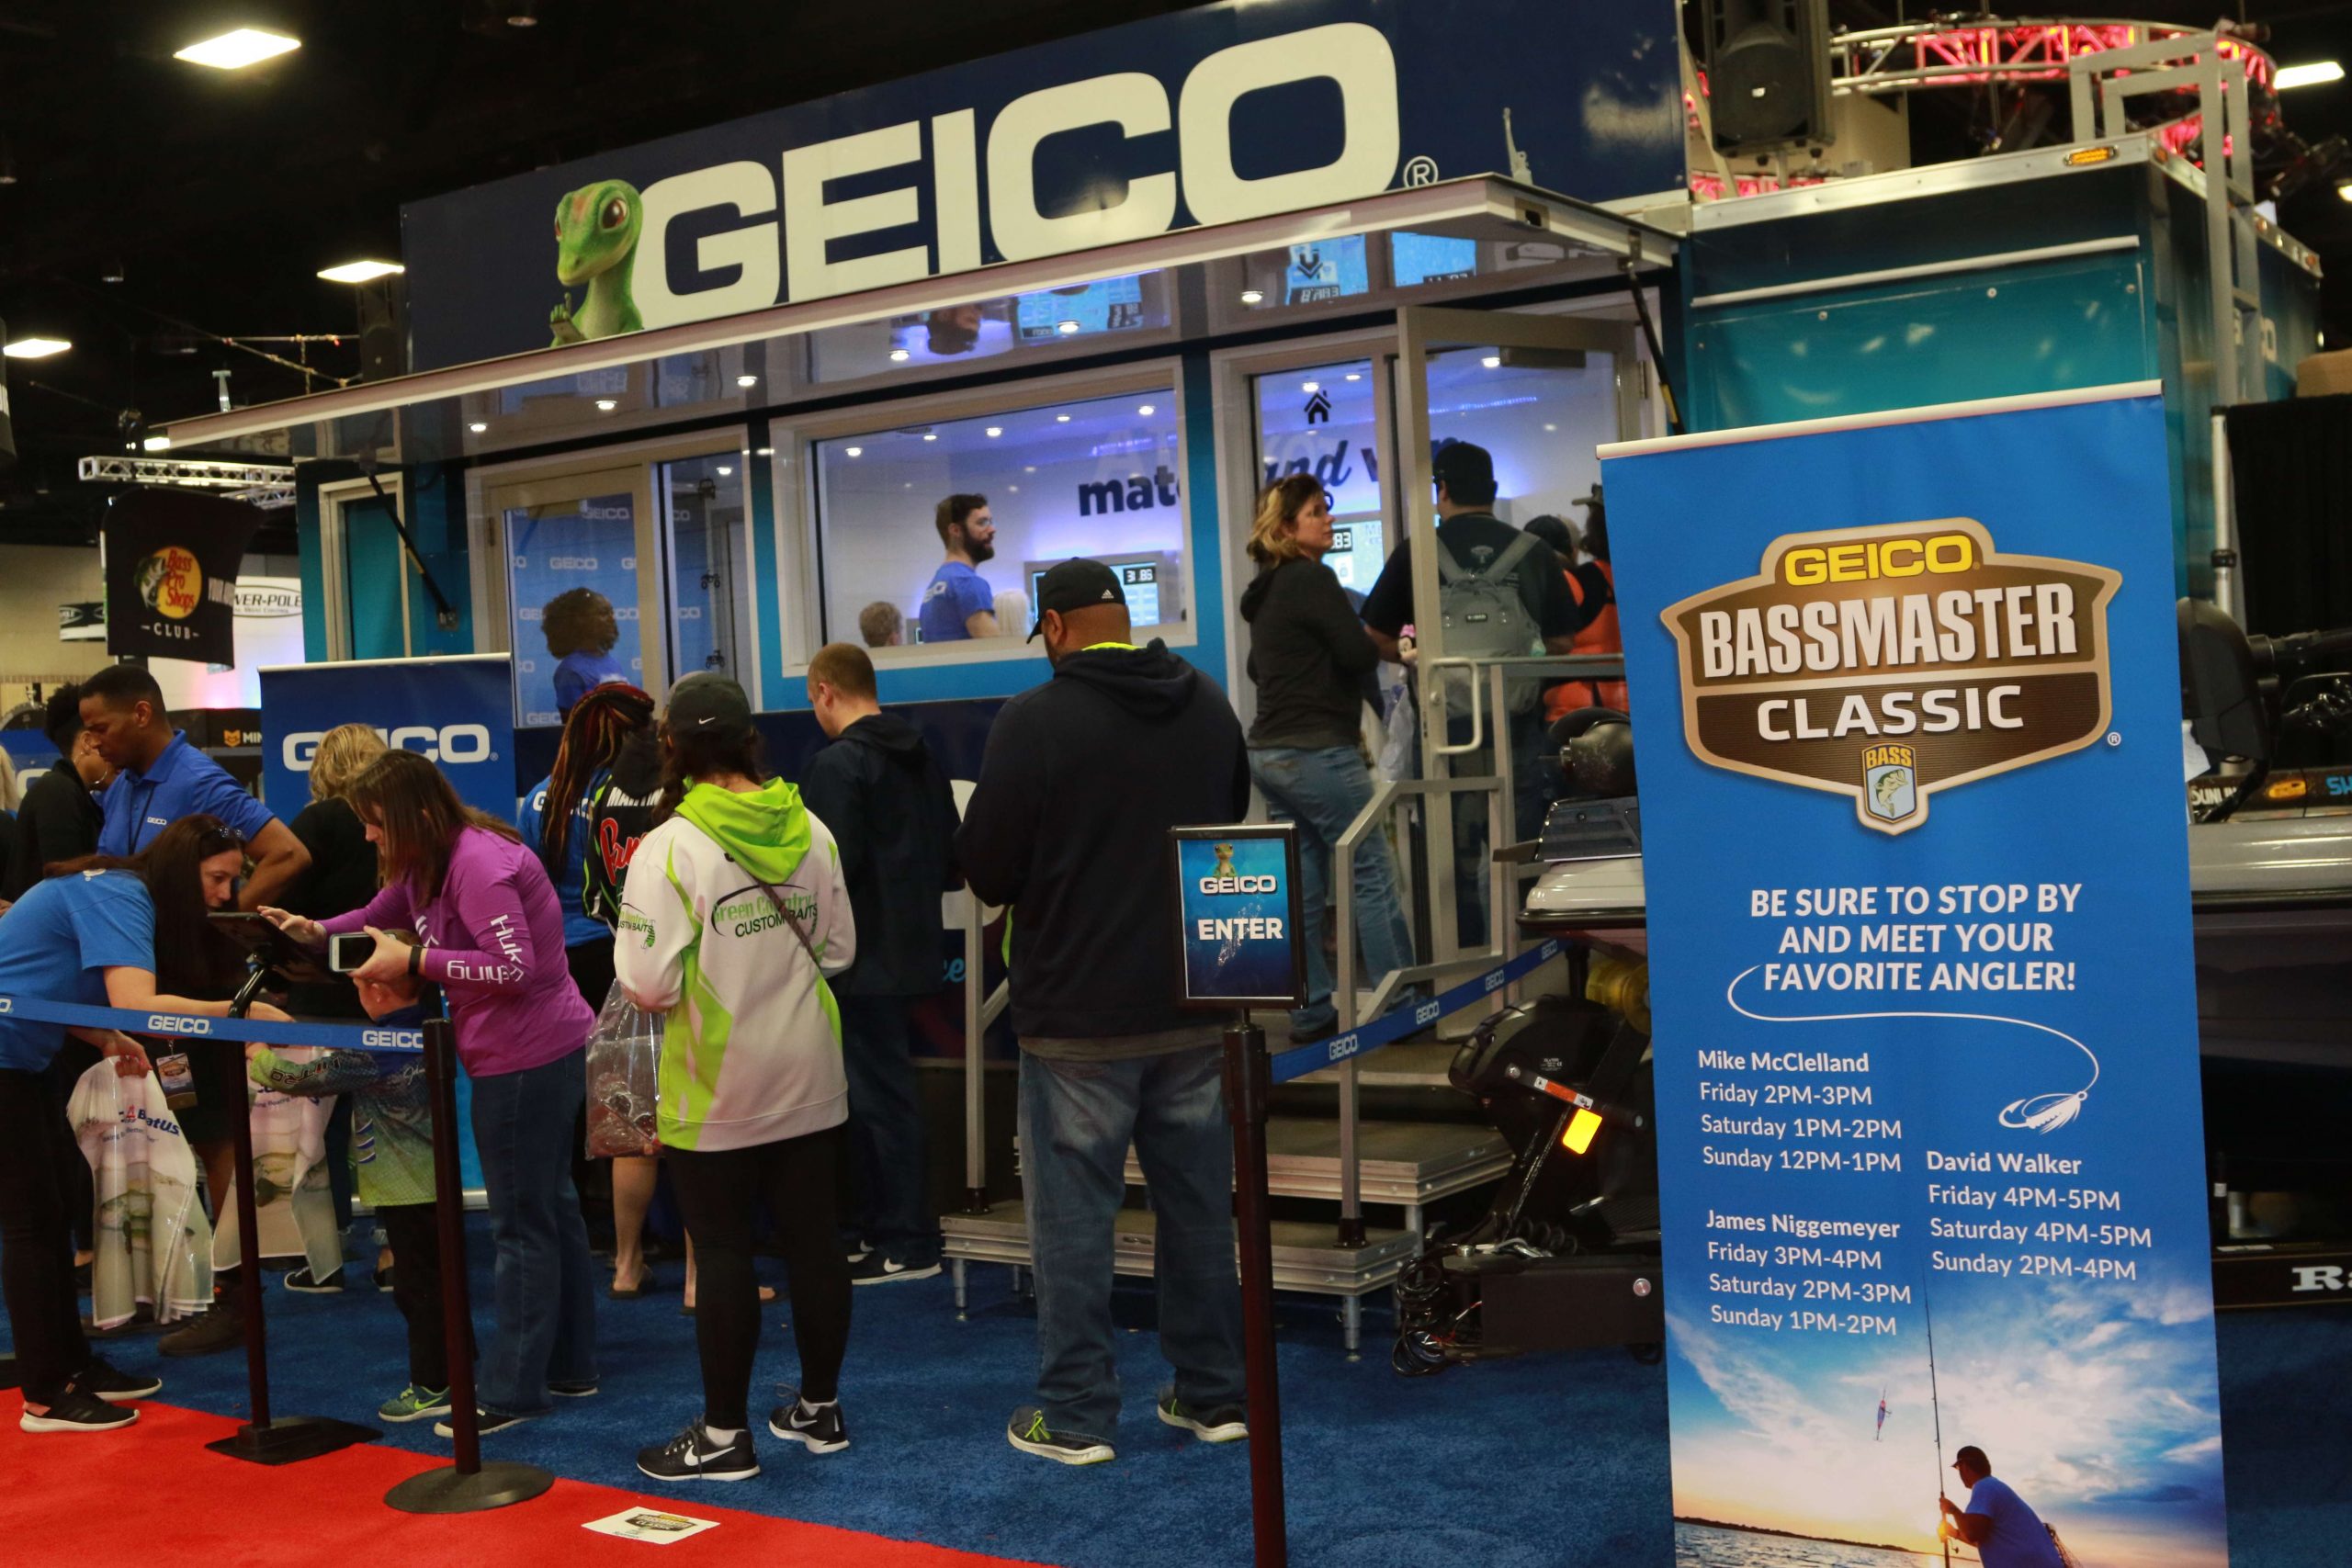 Geico always brings a fun fan experience to the Bassmaster Classic Expo.